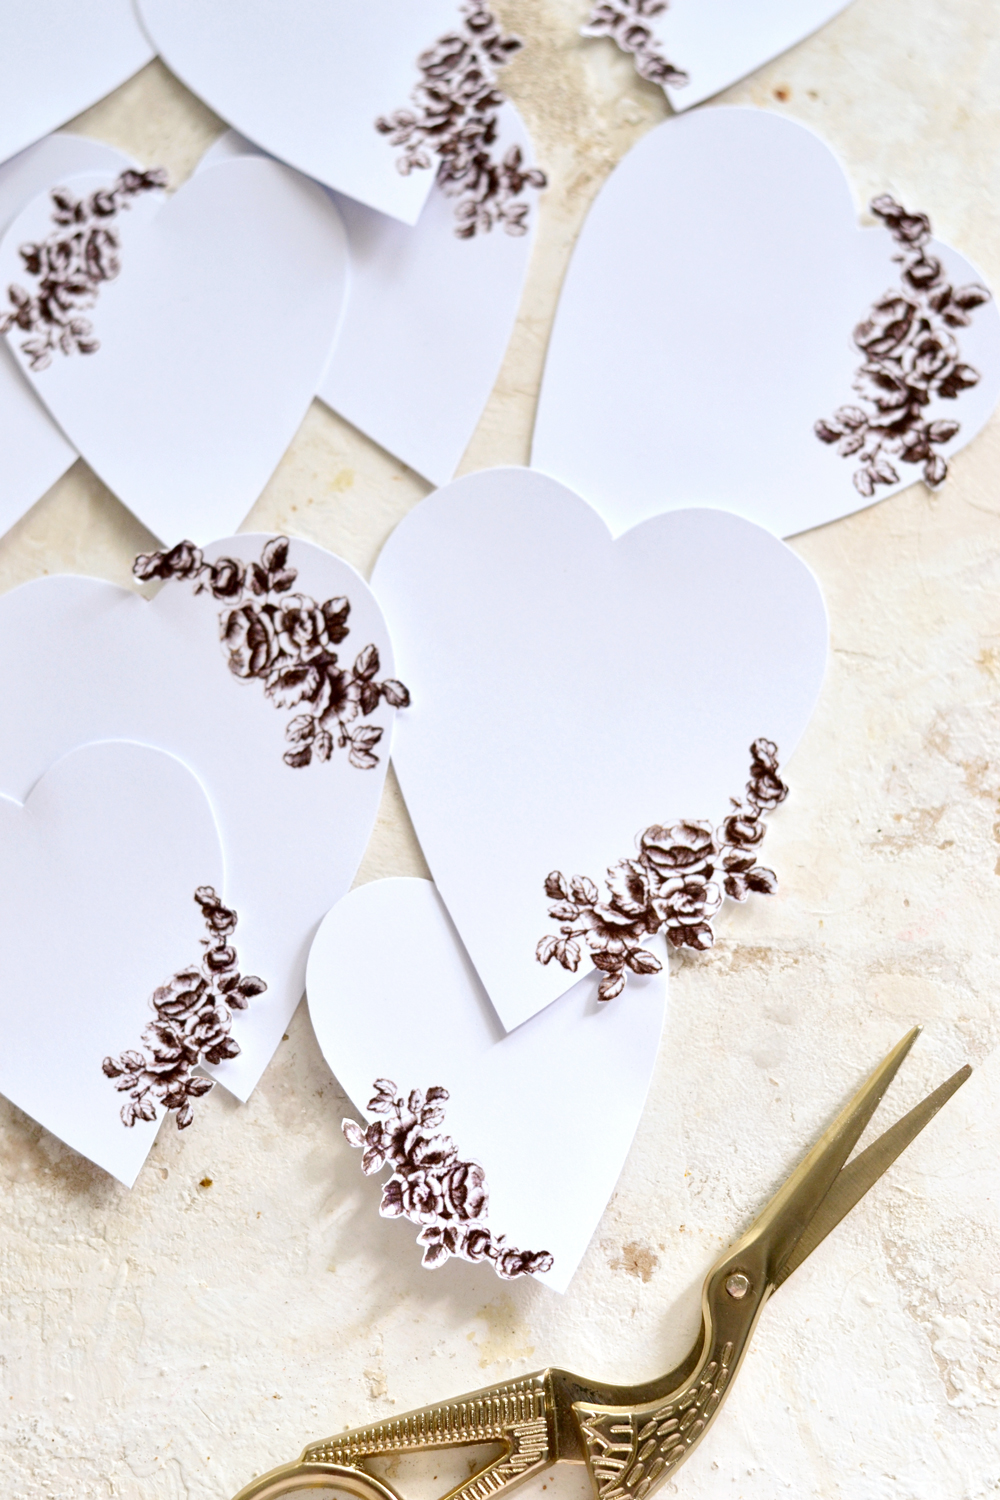 Printable hearts with flowers cut out